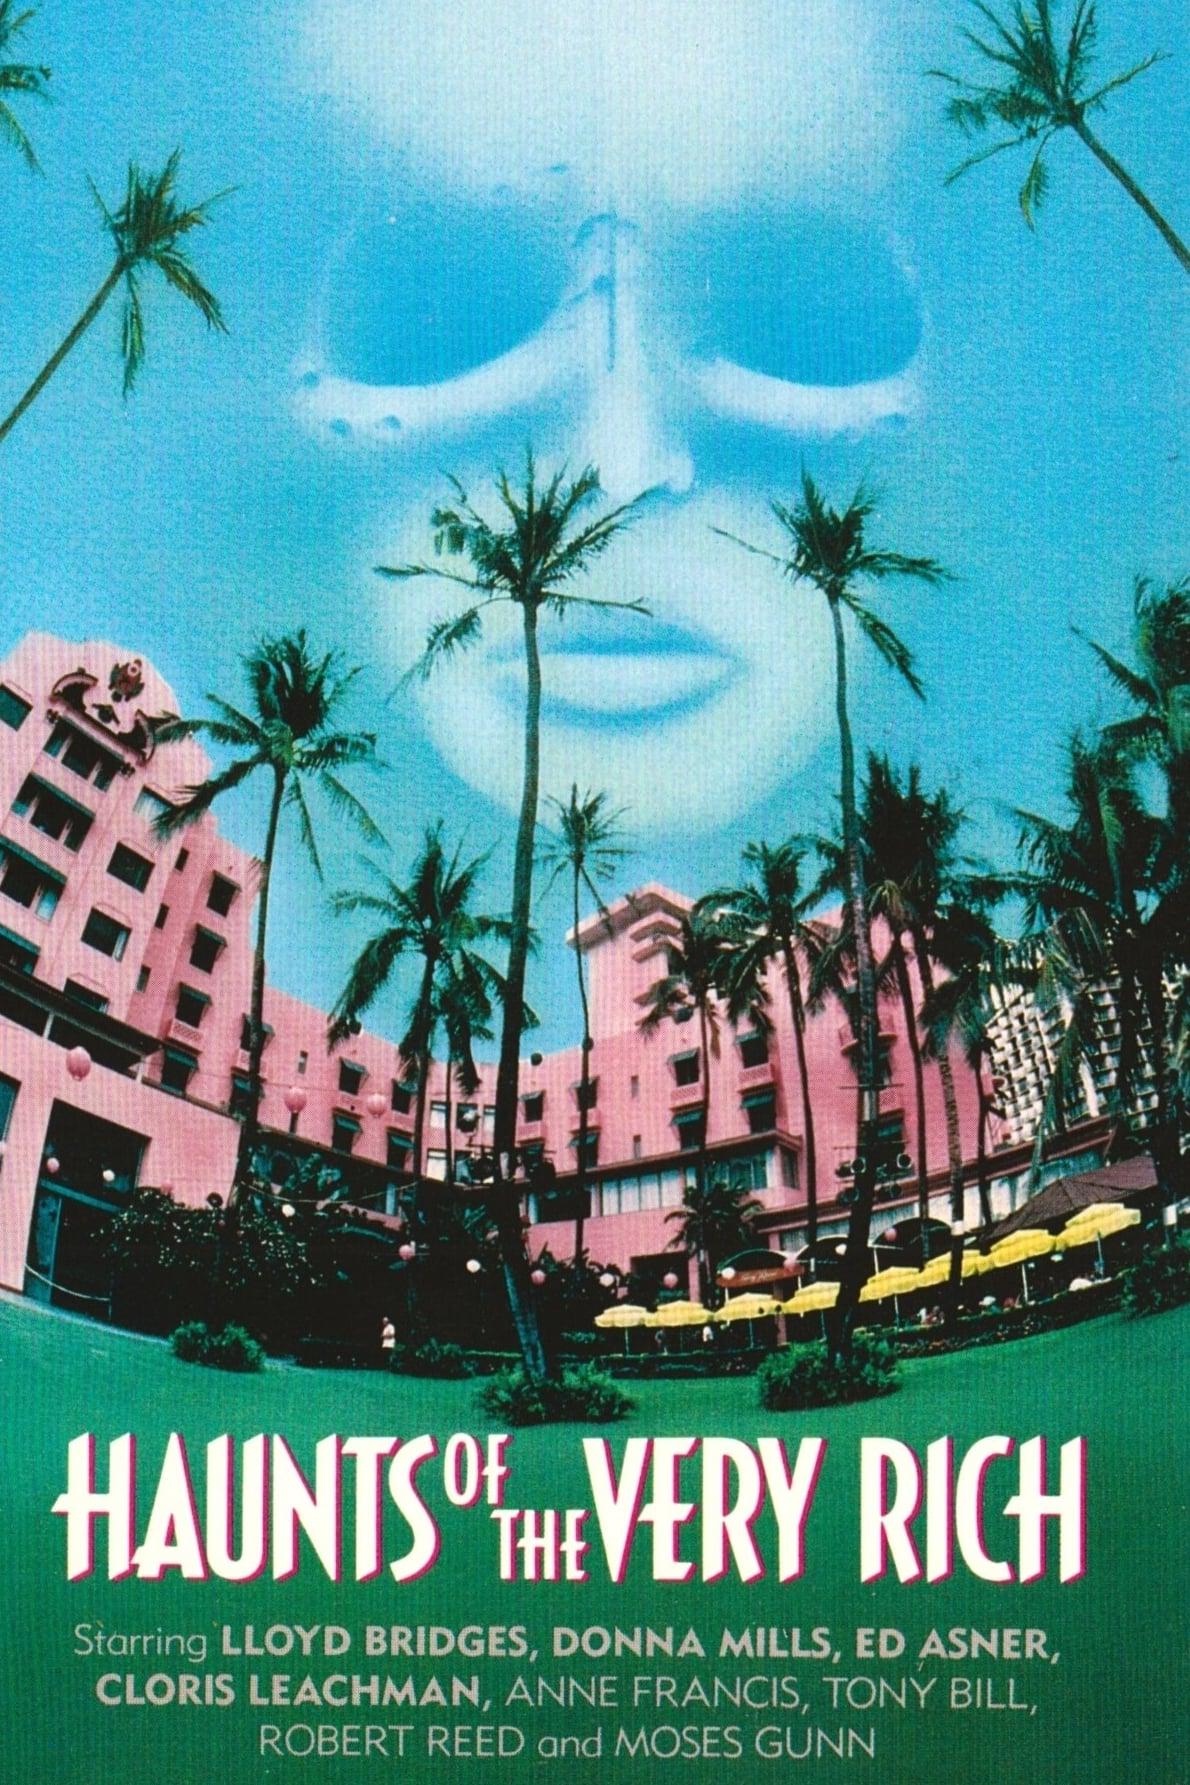 Haunts of the Very Rich poster